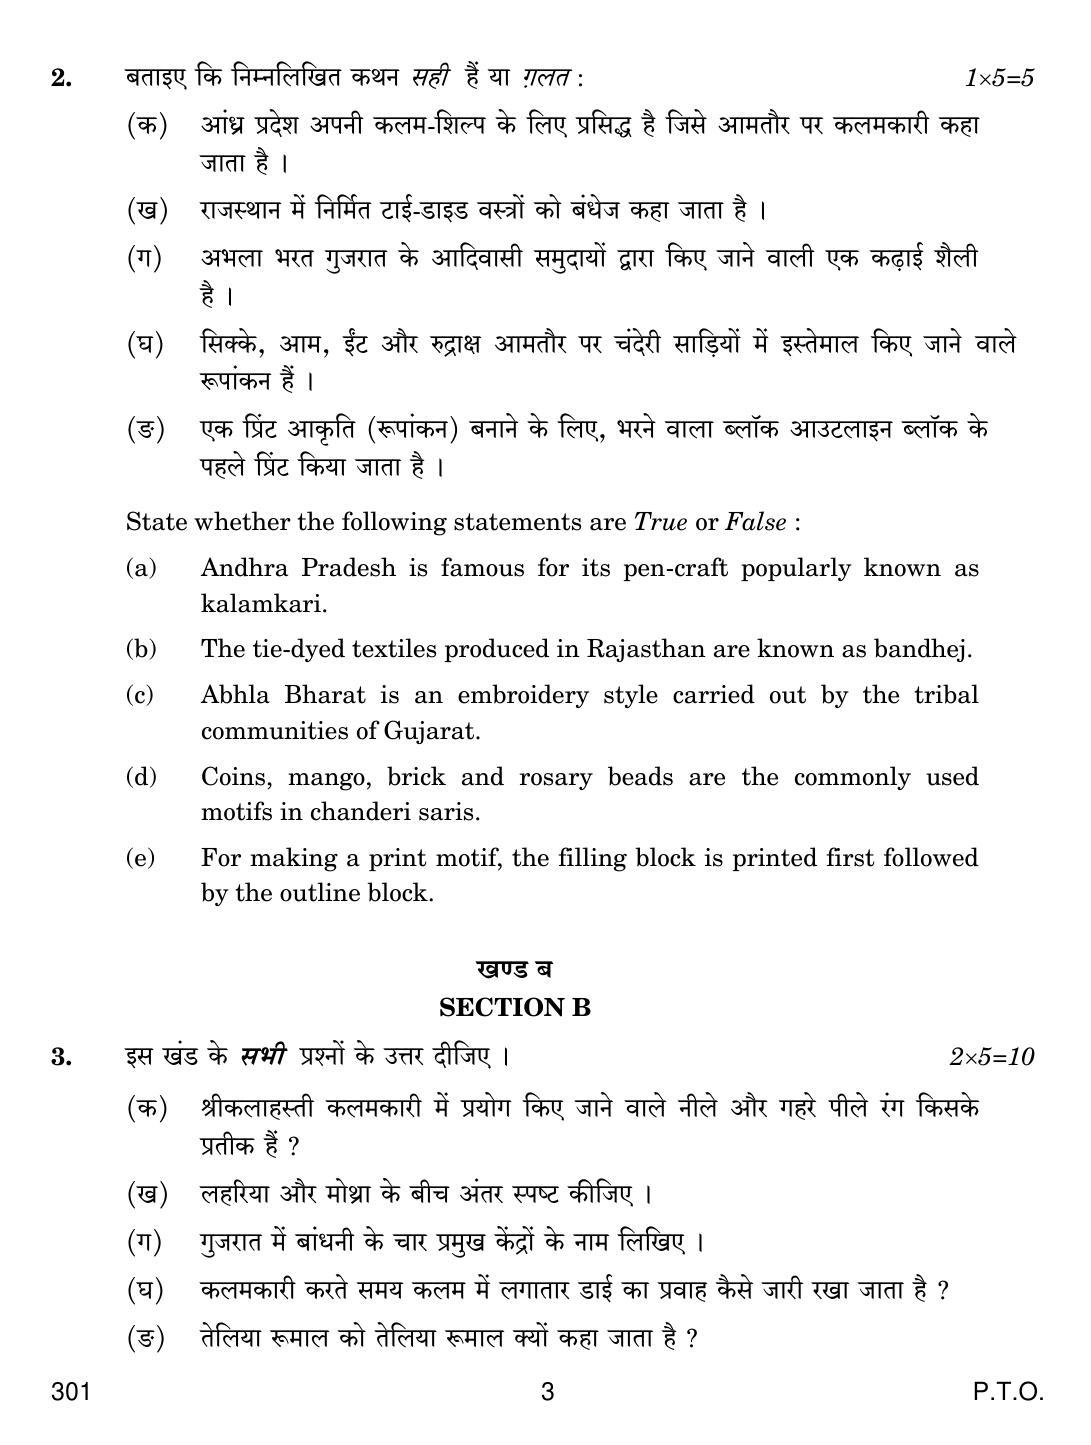 CBSE Class 12 301 TRAD. INDIAN TEXTILE 2018 Question Paper - Page 3